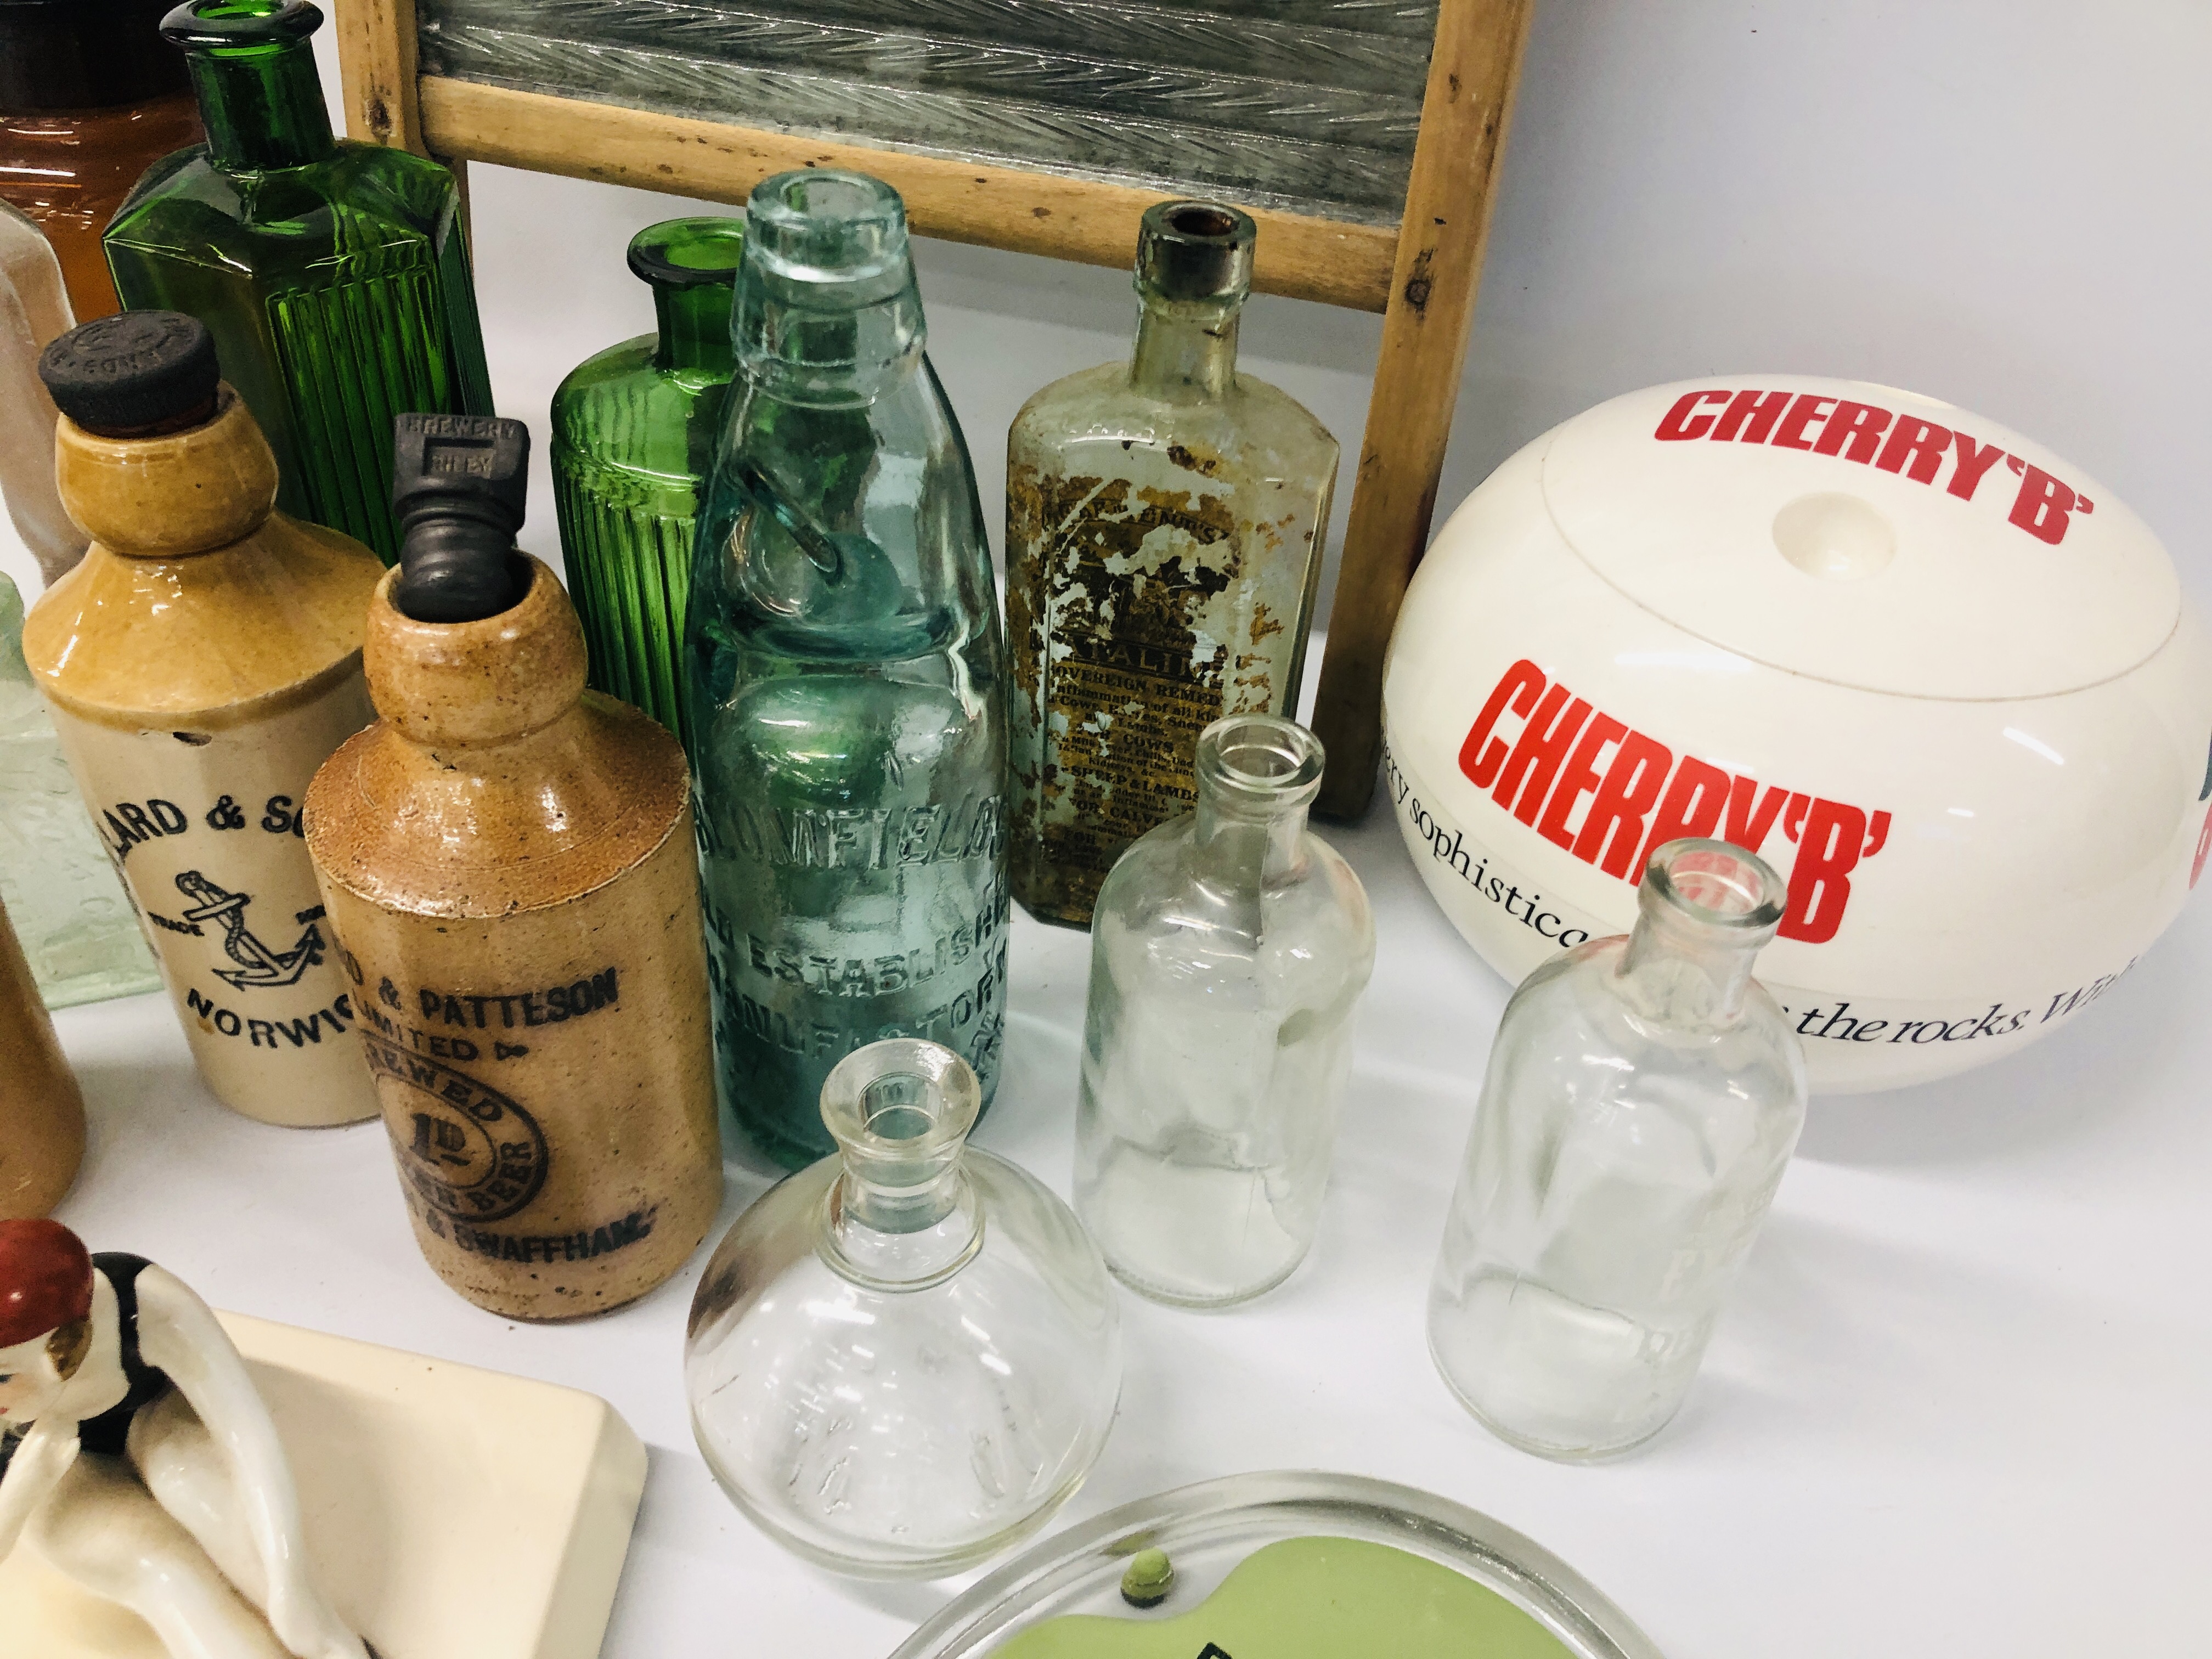 A SMALL COLLECTION OF ANTIQUE GLASS BOTTLES INCLUDING ALLY, MILK, MEDICINE, ETC. - Image 5 of 9